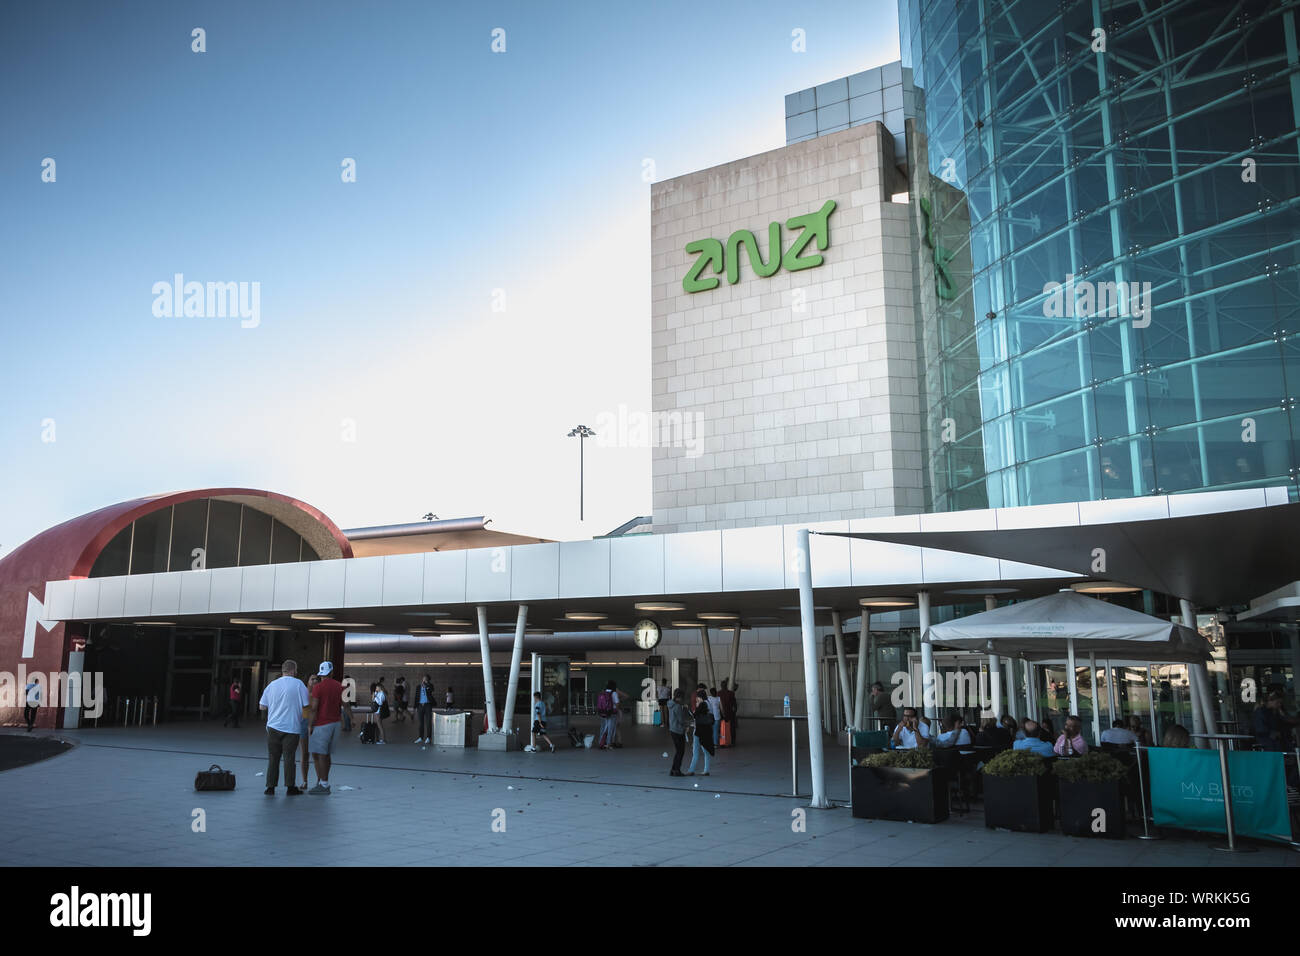 Lisbon, Portugal - August 7, 2018: exterior view of Lisbon International Airport where travelers walk on a summer day Stock Photo